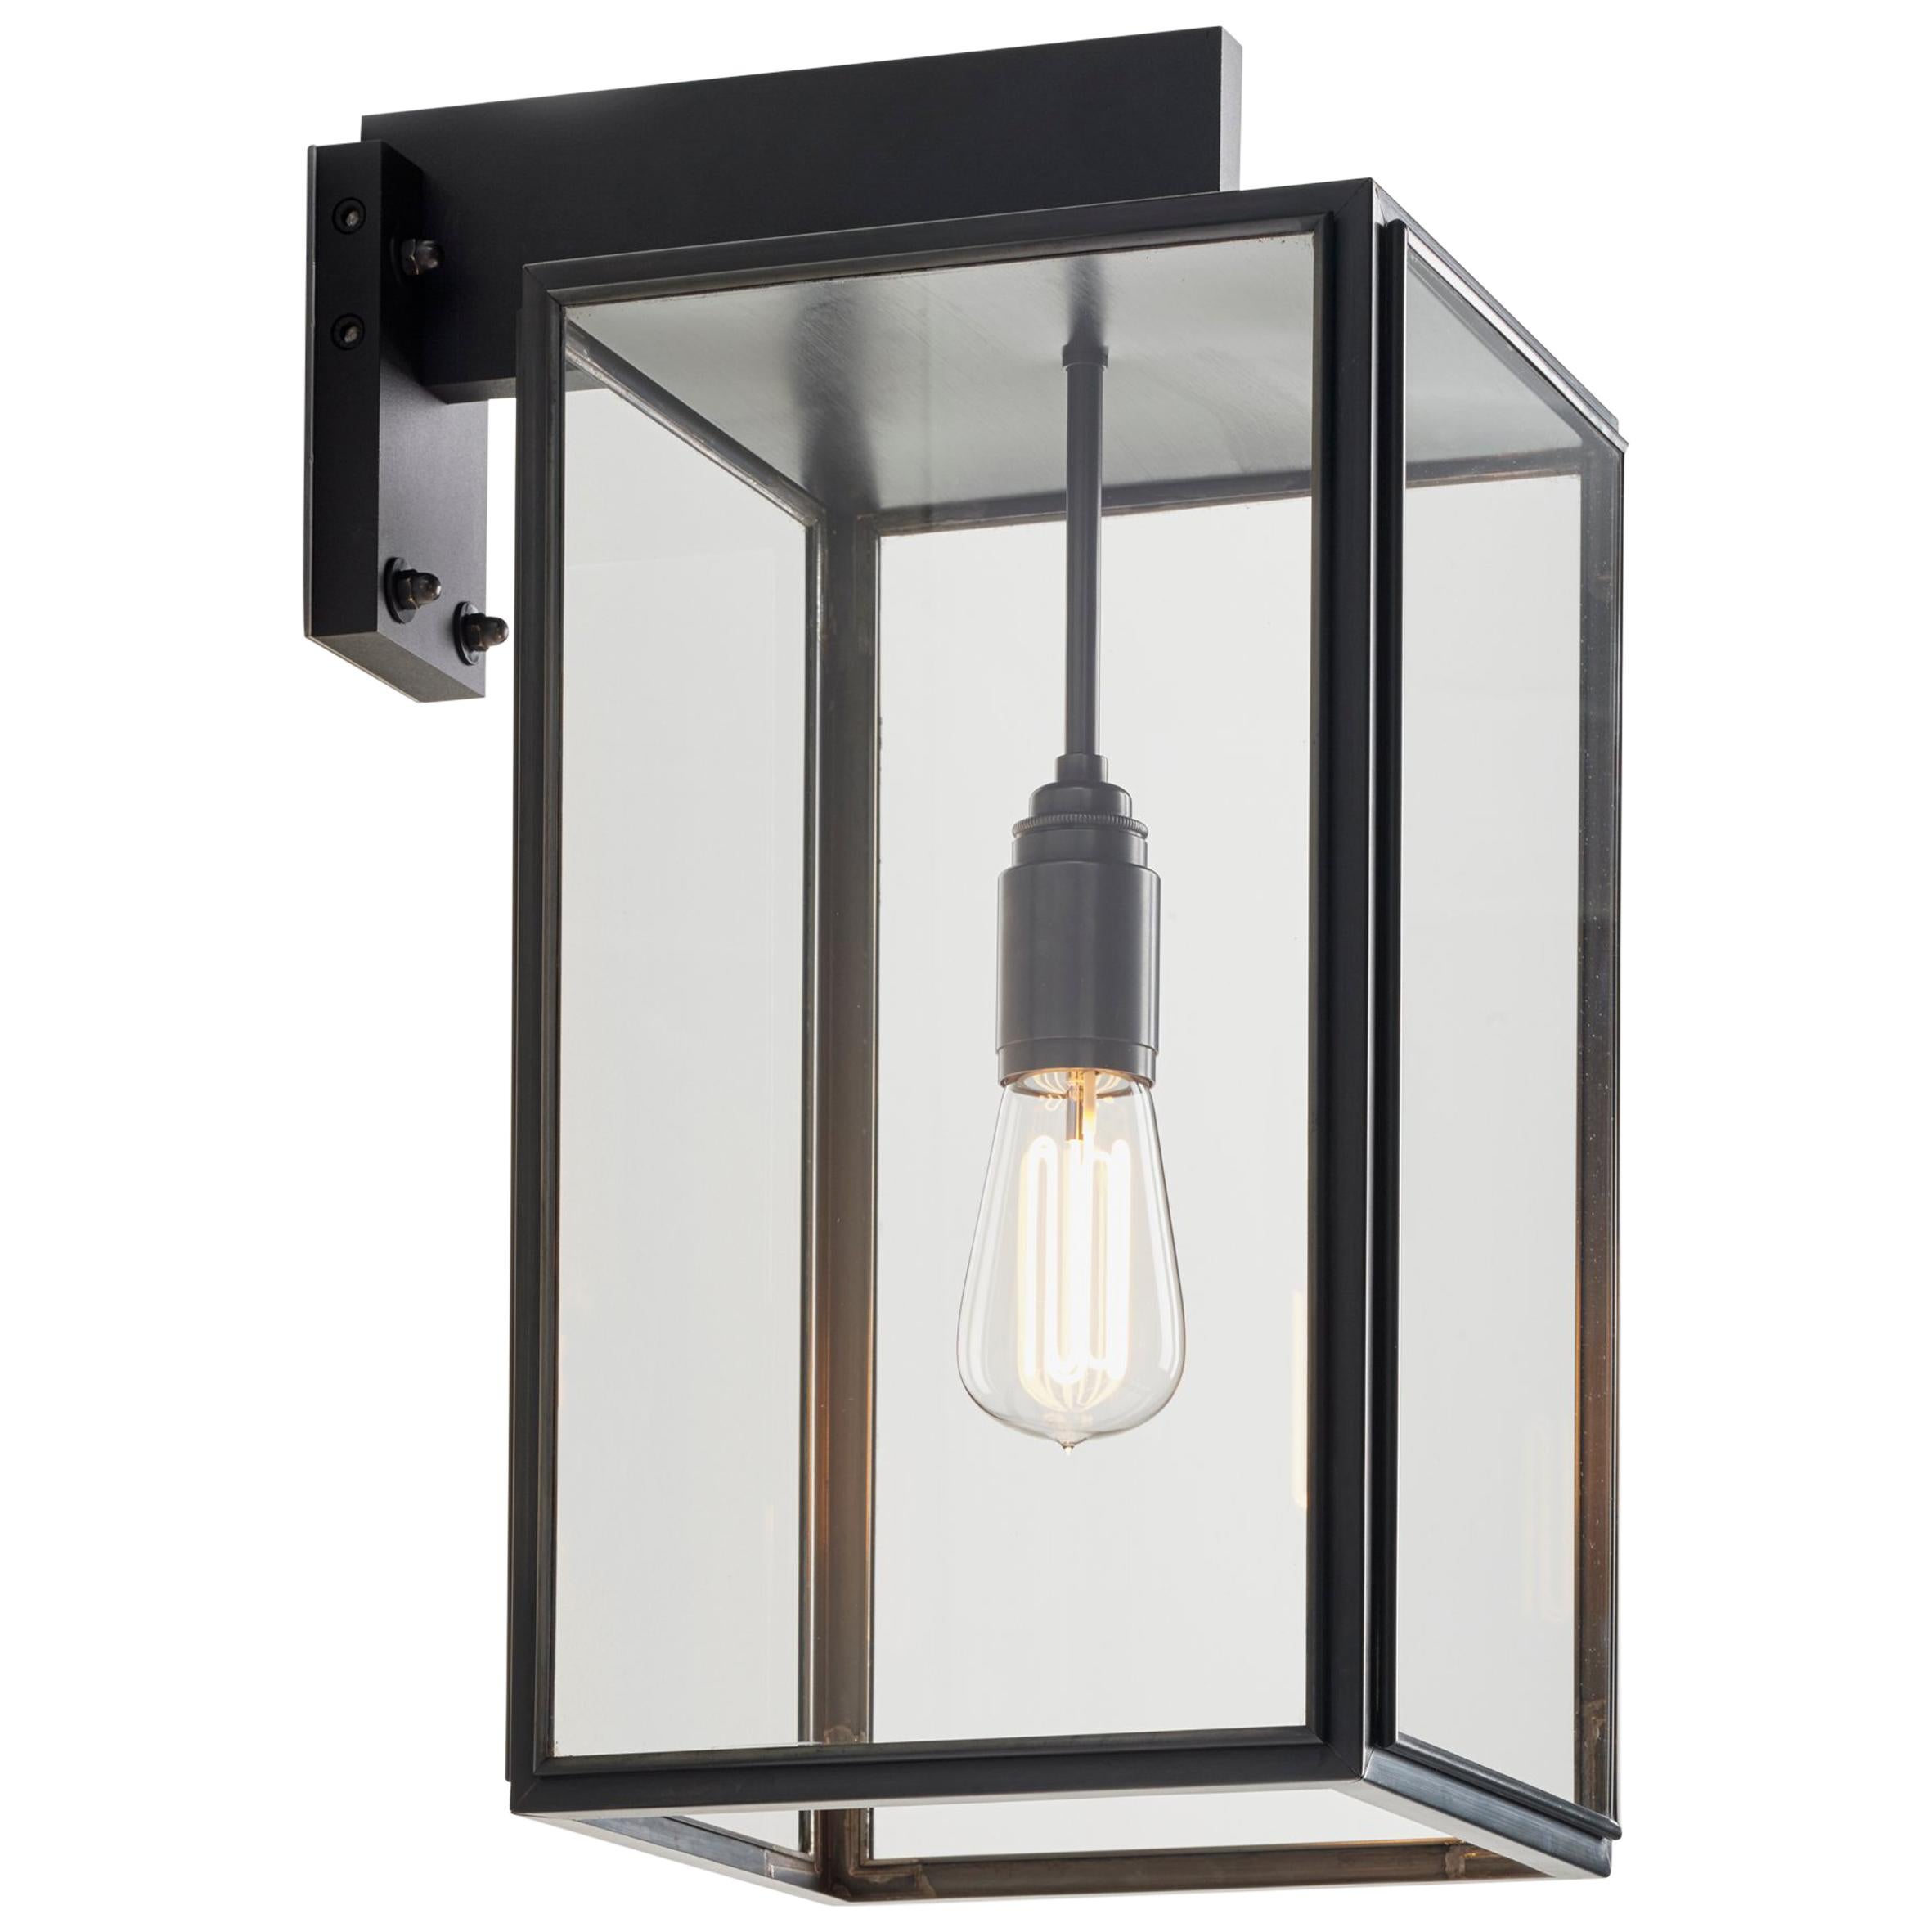 Tekna Ilford Wall-C Wall Light with Dark Bronze Finish and Clear Glass